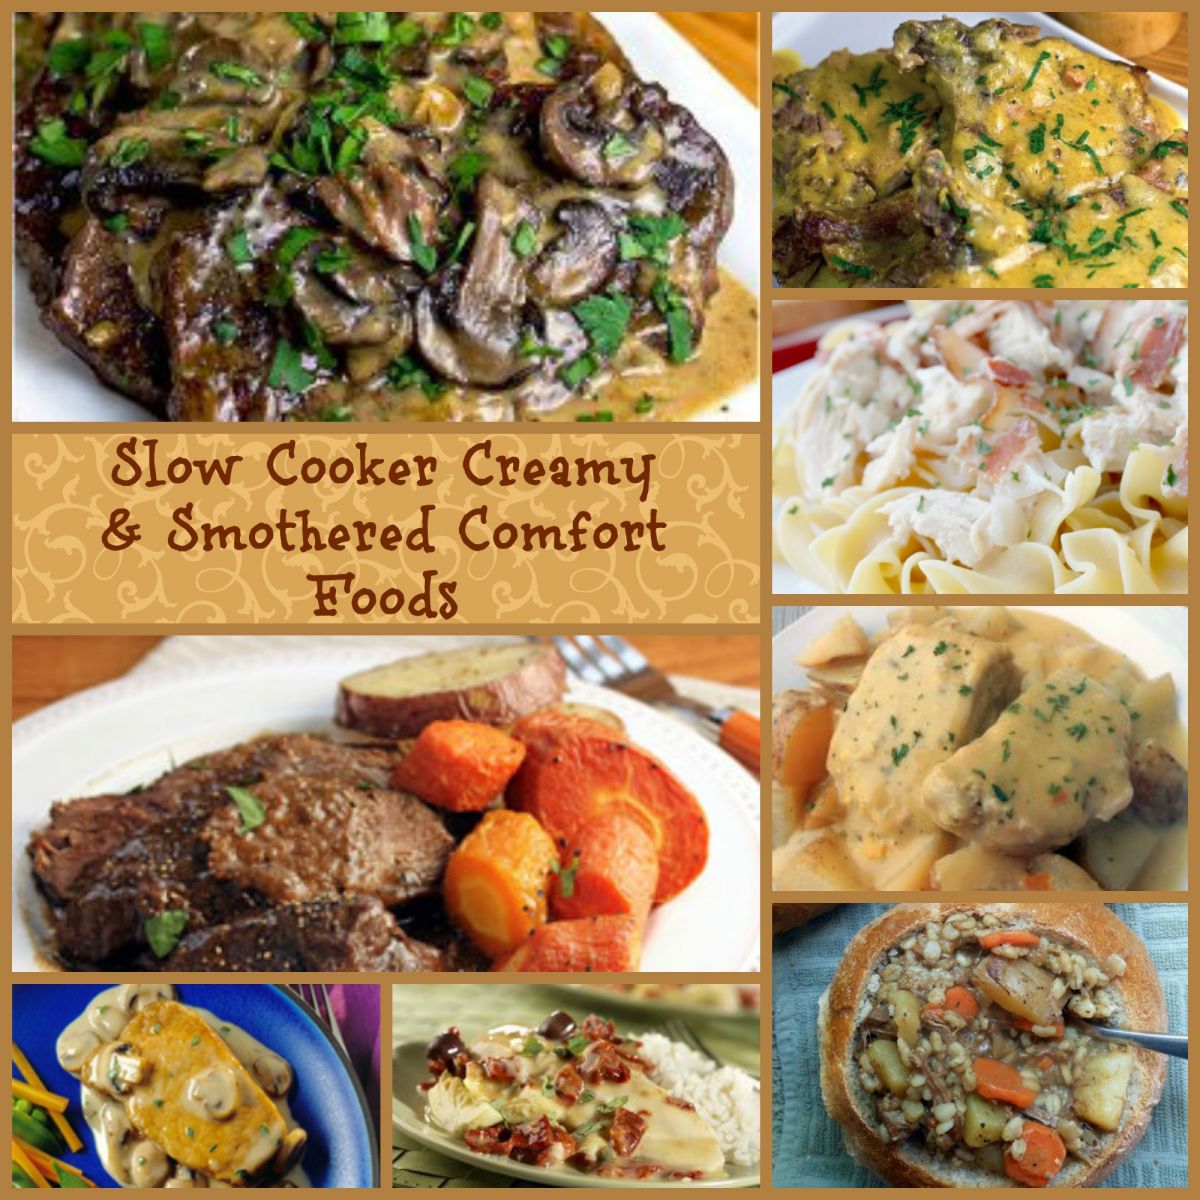 Slow Cooker Creamy and Smothered Comfort Foods